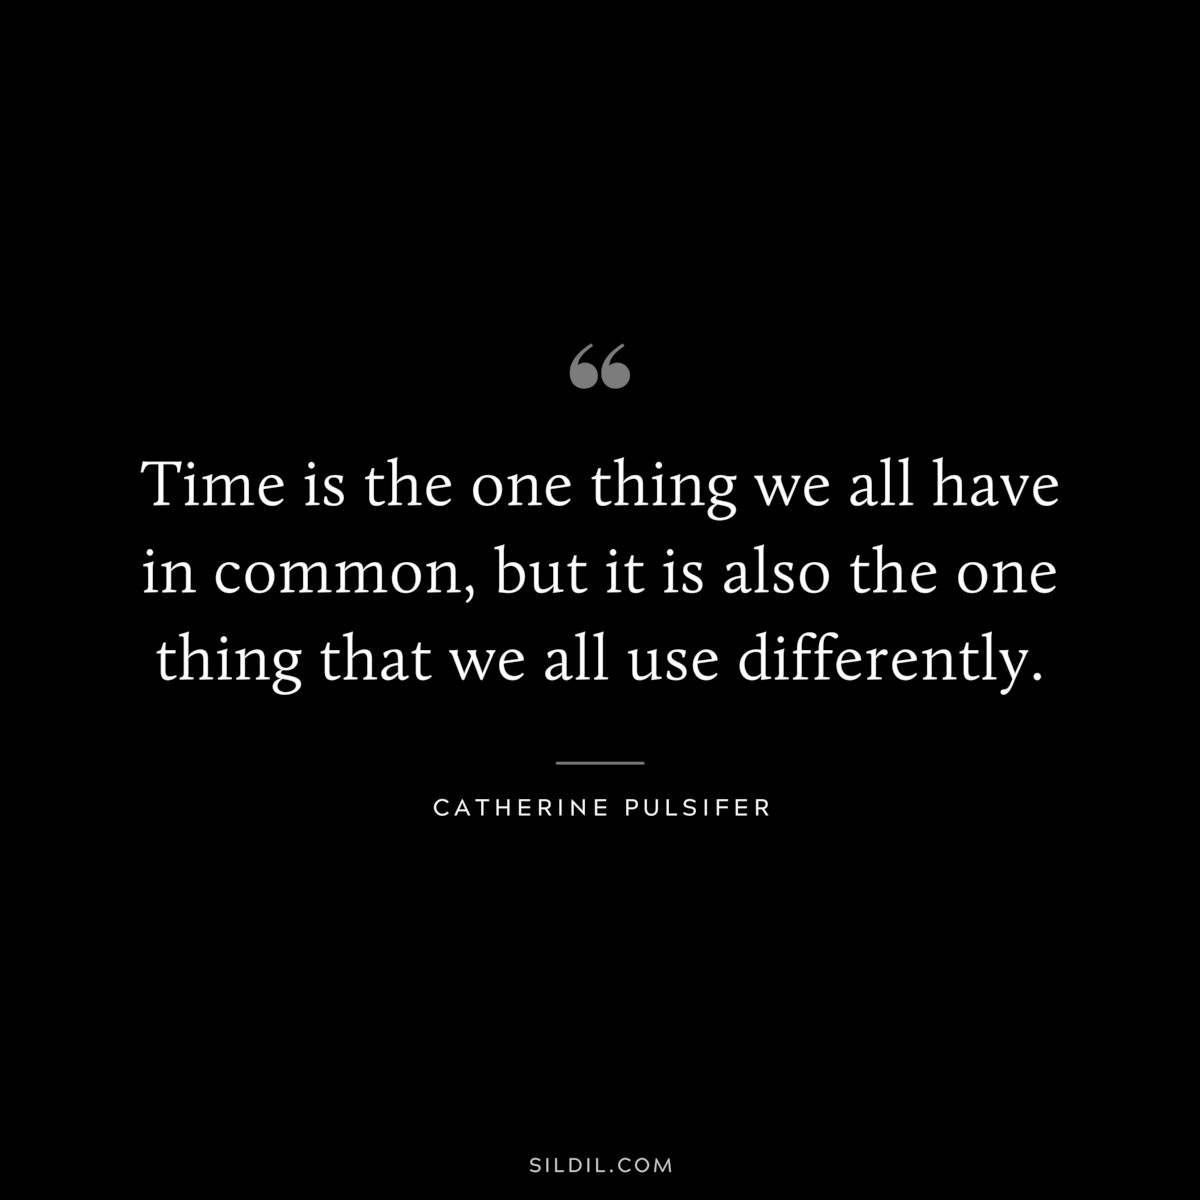 Time is the one thing we all have in common, but it is also the one thing that we all use differently. ― Catherine Pulsifer